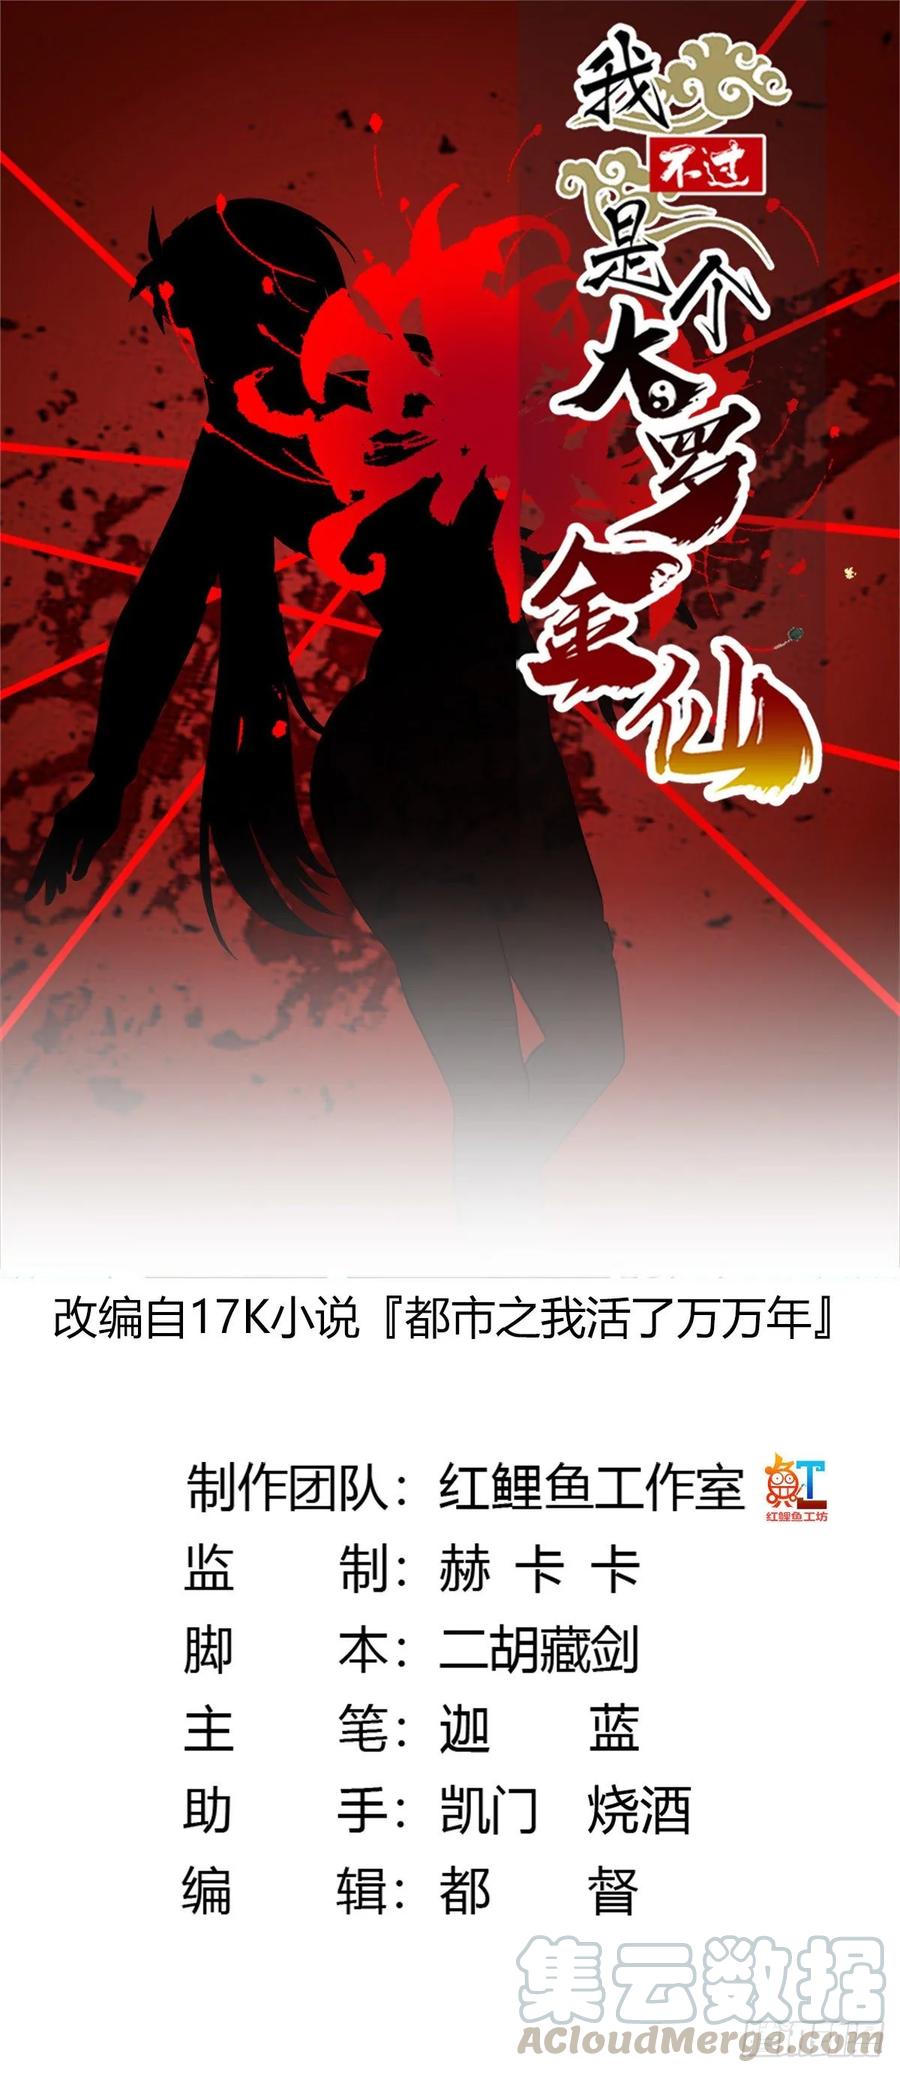 Chaos Emperor Chapter 55